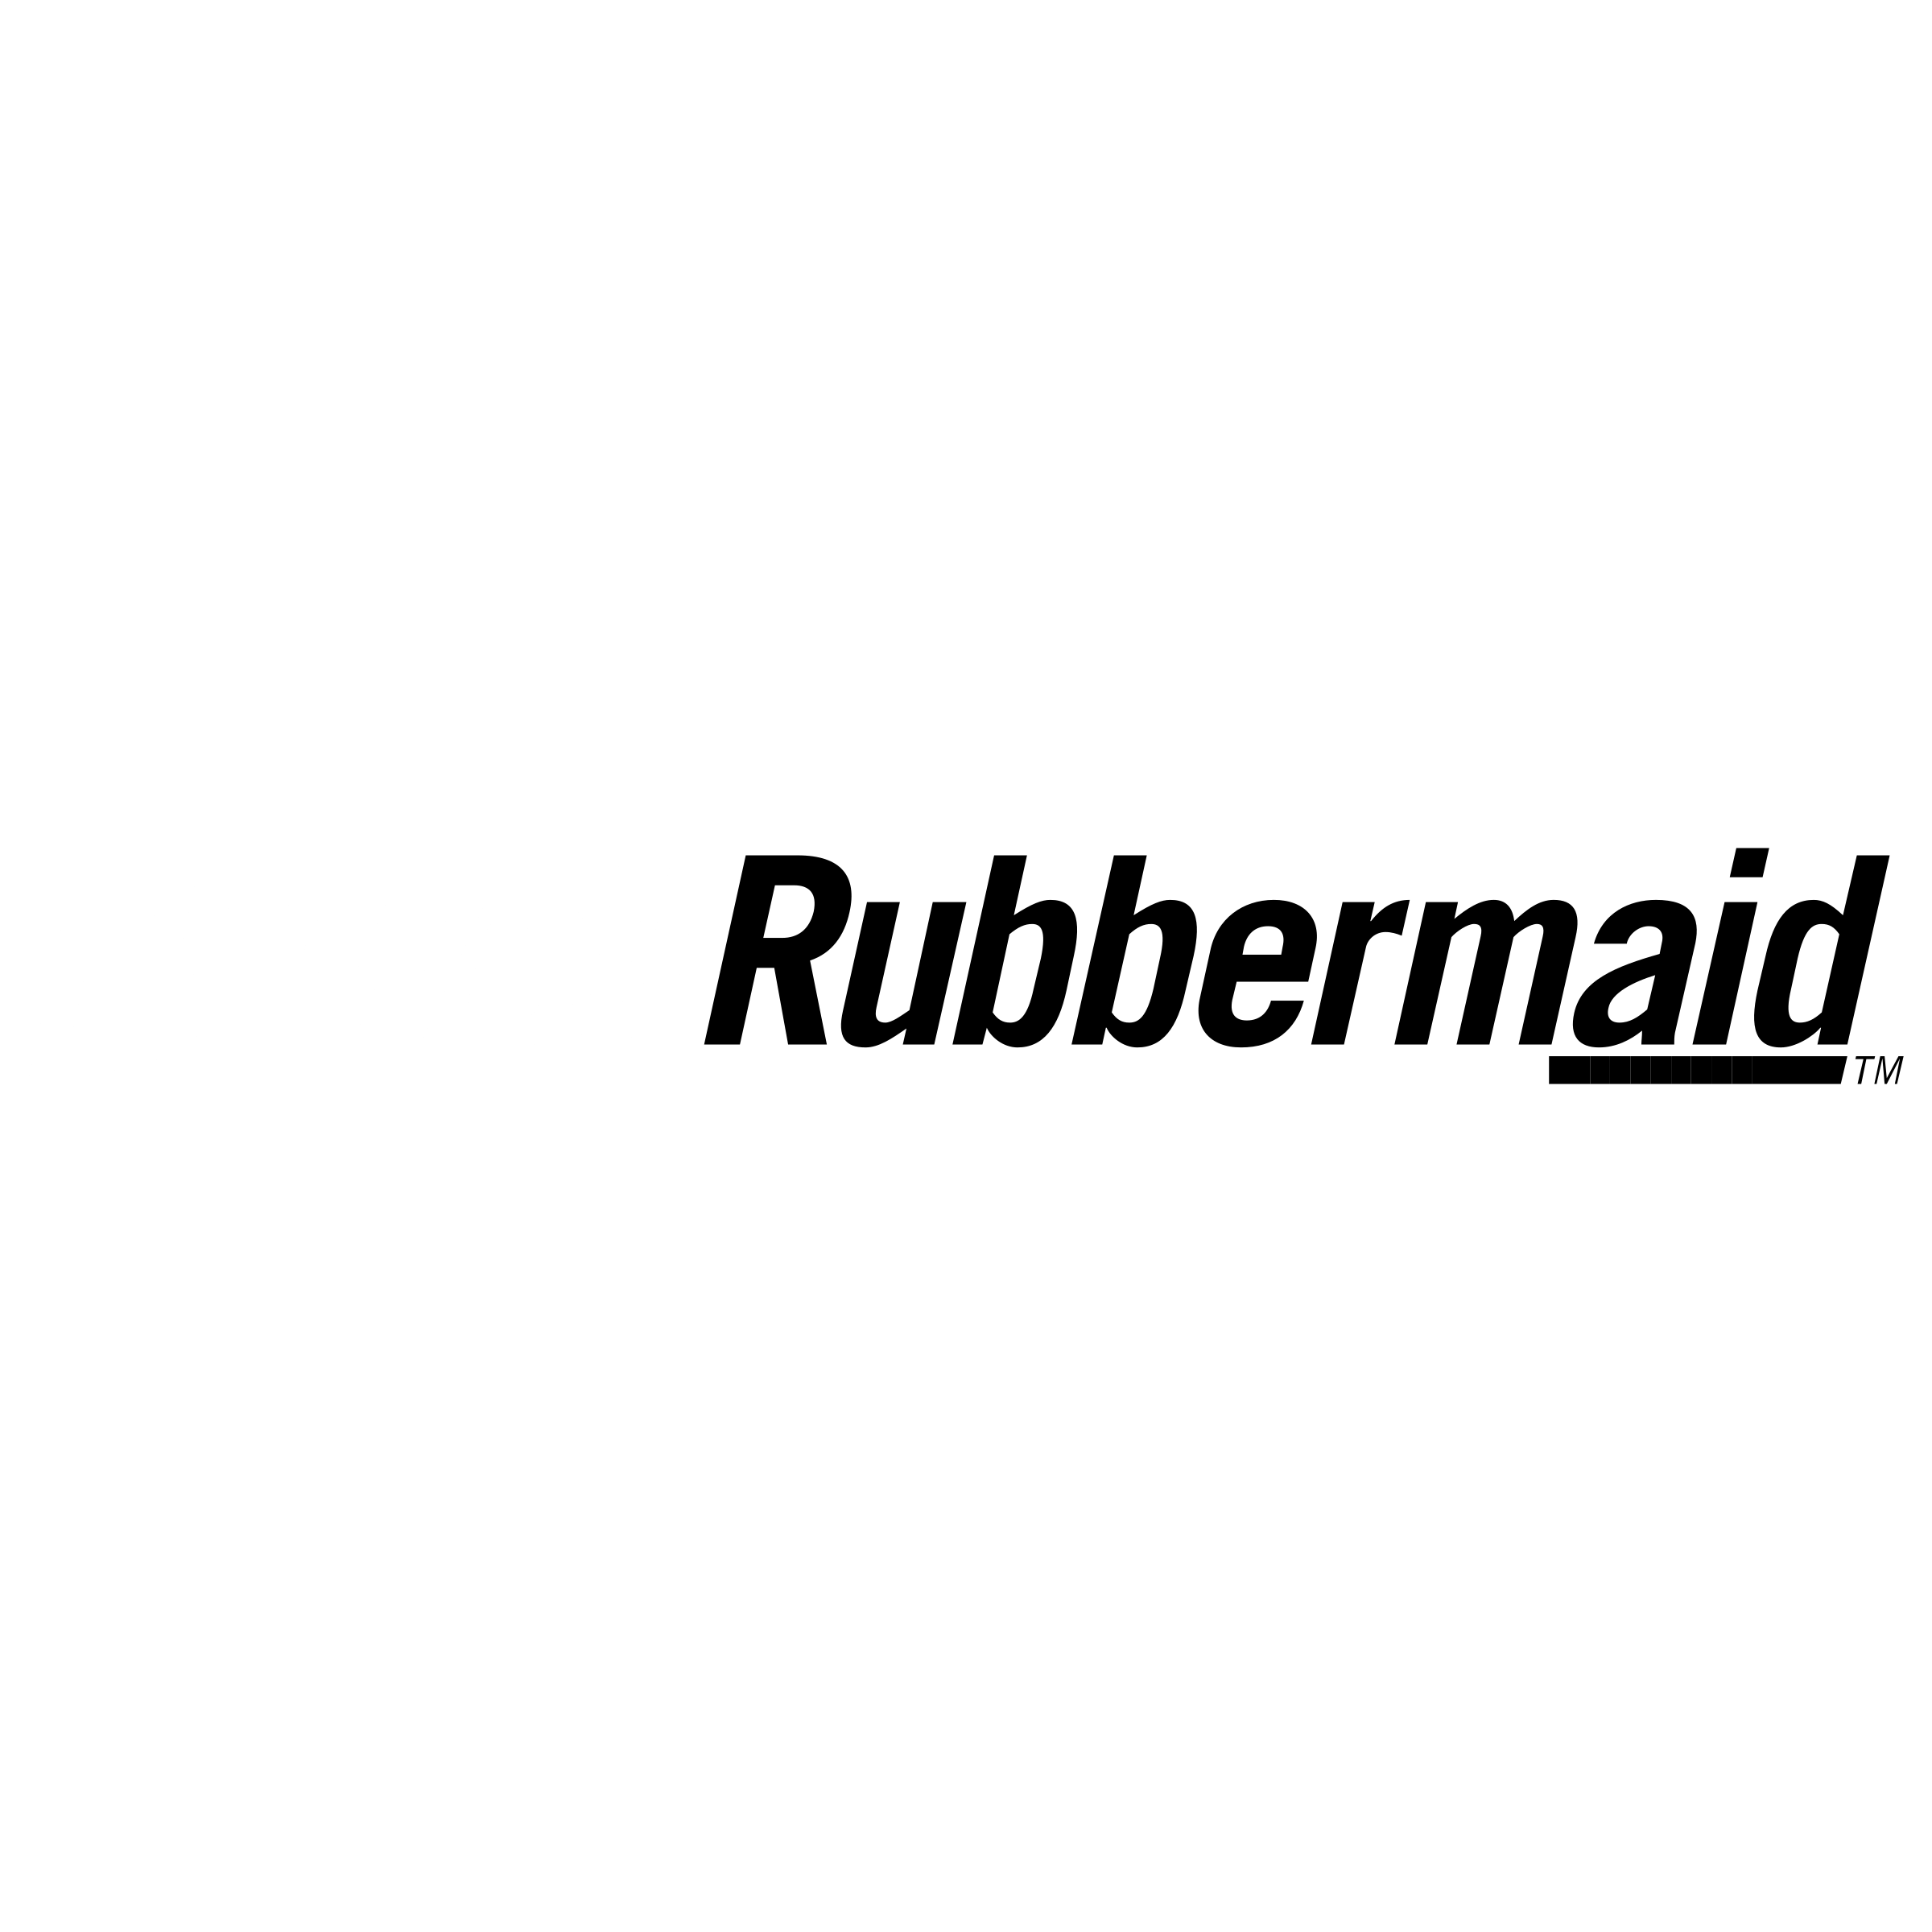 Newell Logo - Newell Rubbermaid Logo PNG Transparent & SVG Vector - Freebie Supply